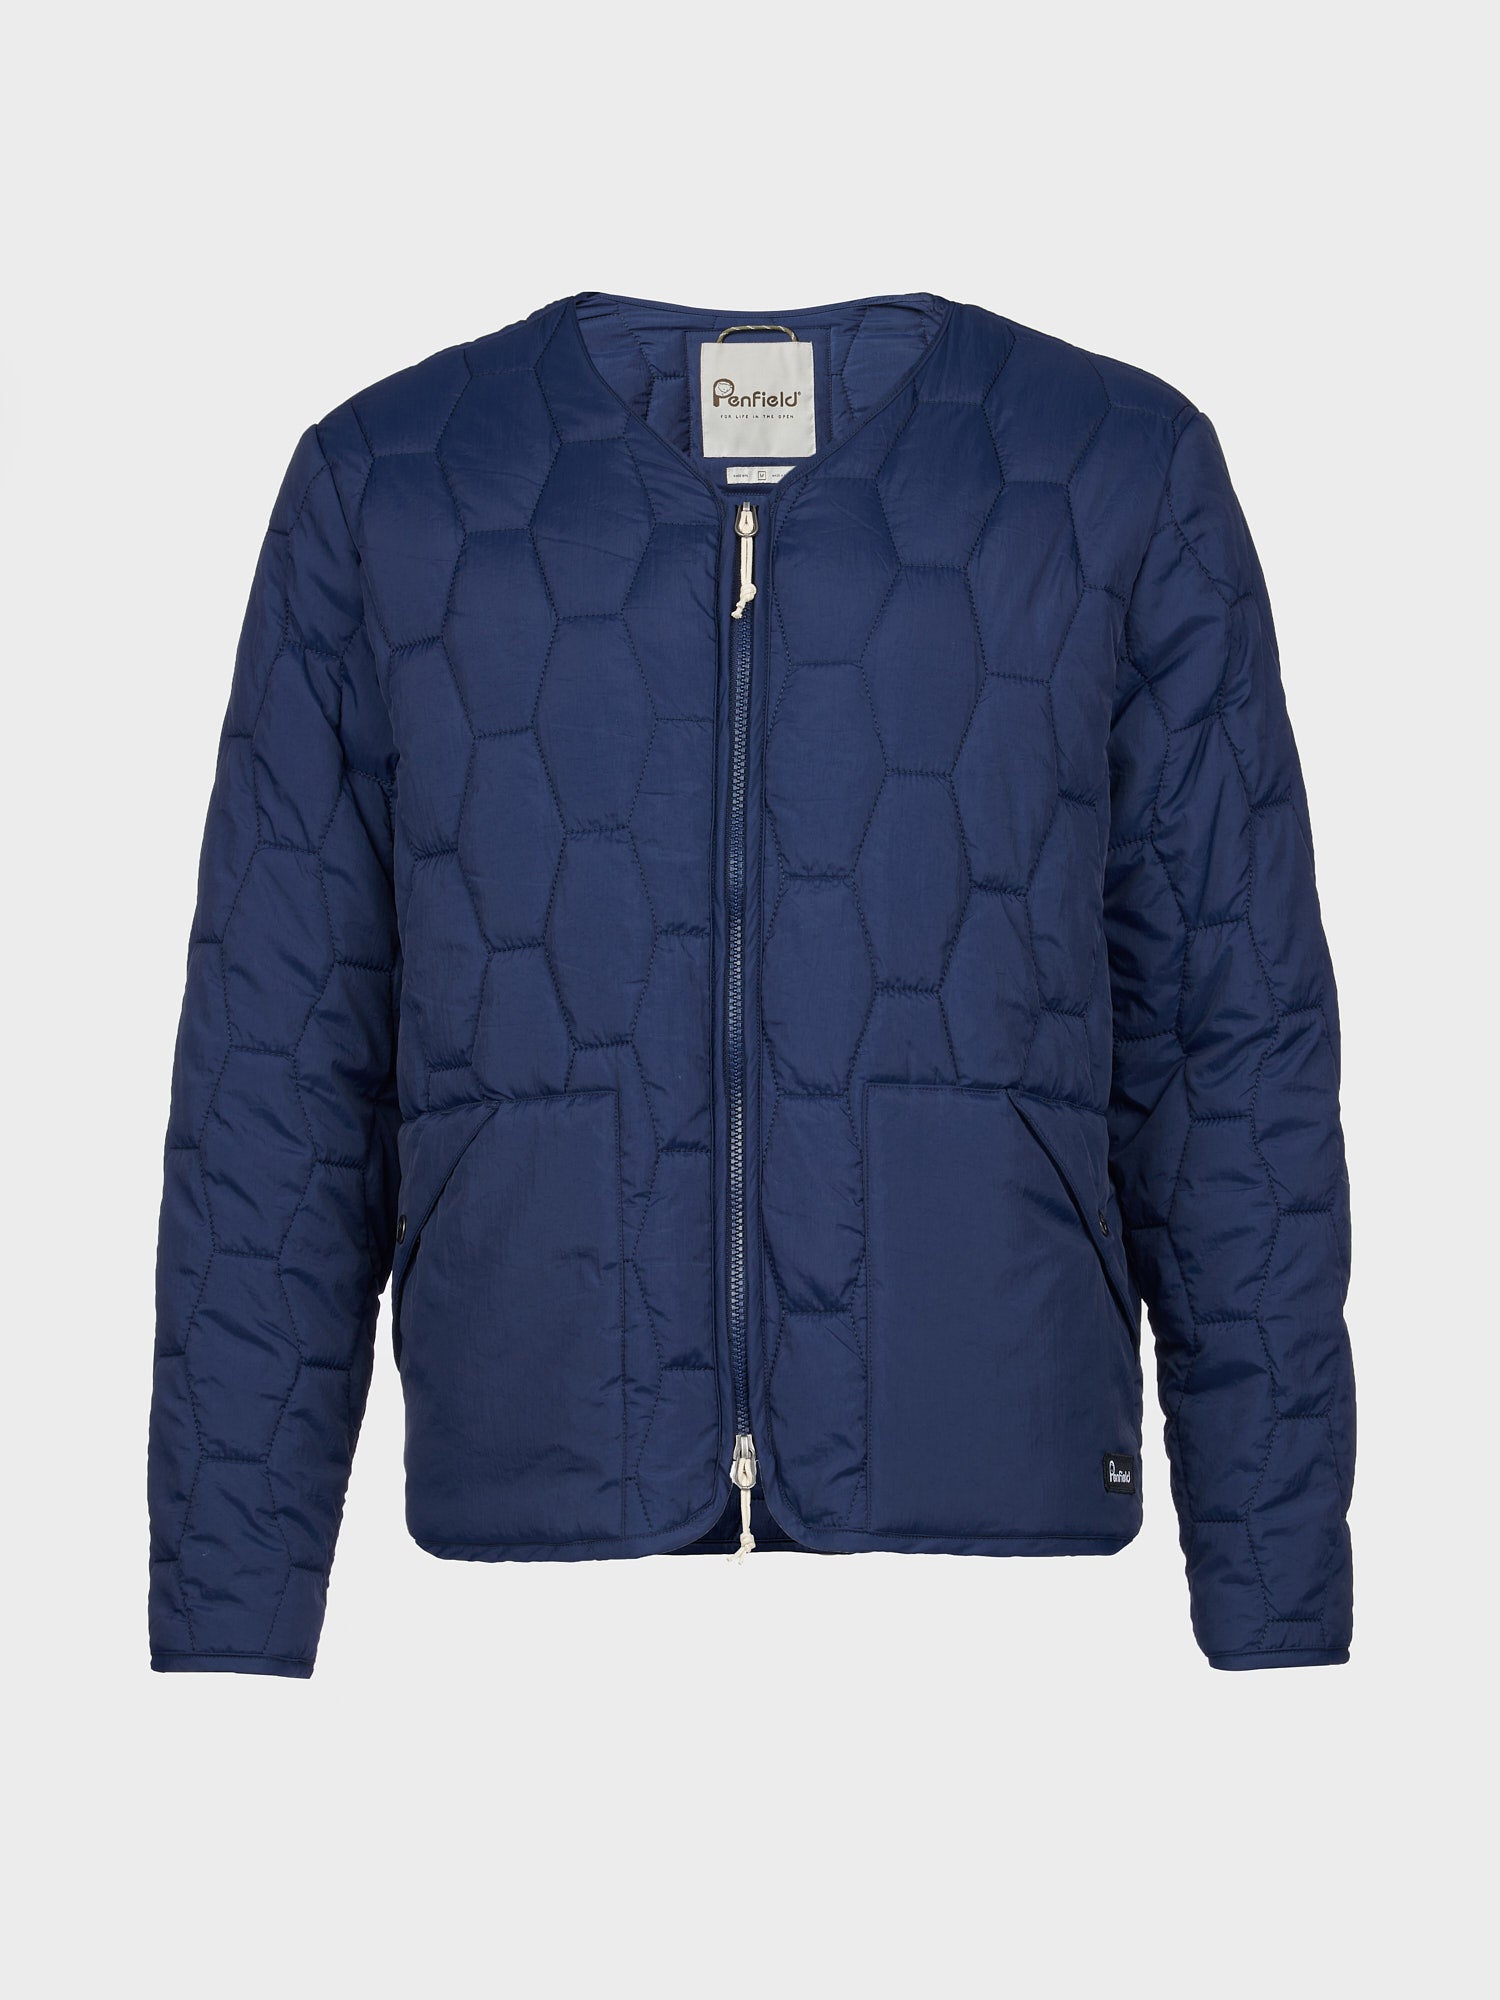 Penfield Jackets & Coats | Penfield (from Madewell) Women’s Navy Down Puffy Toggle Hooded Jacket | Color: Blue | Size: M | Lotsnjems's Closet